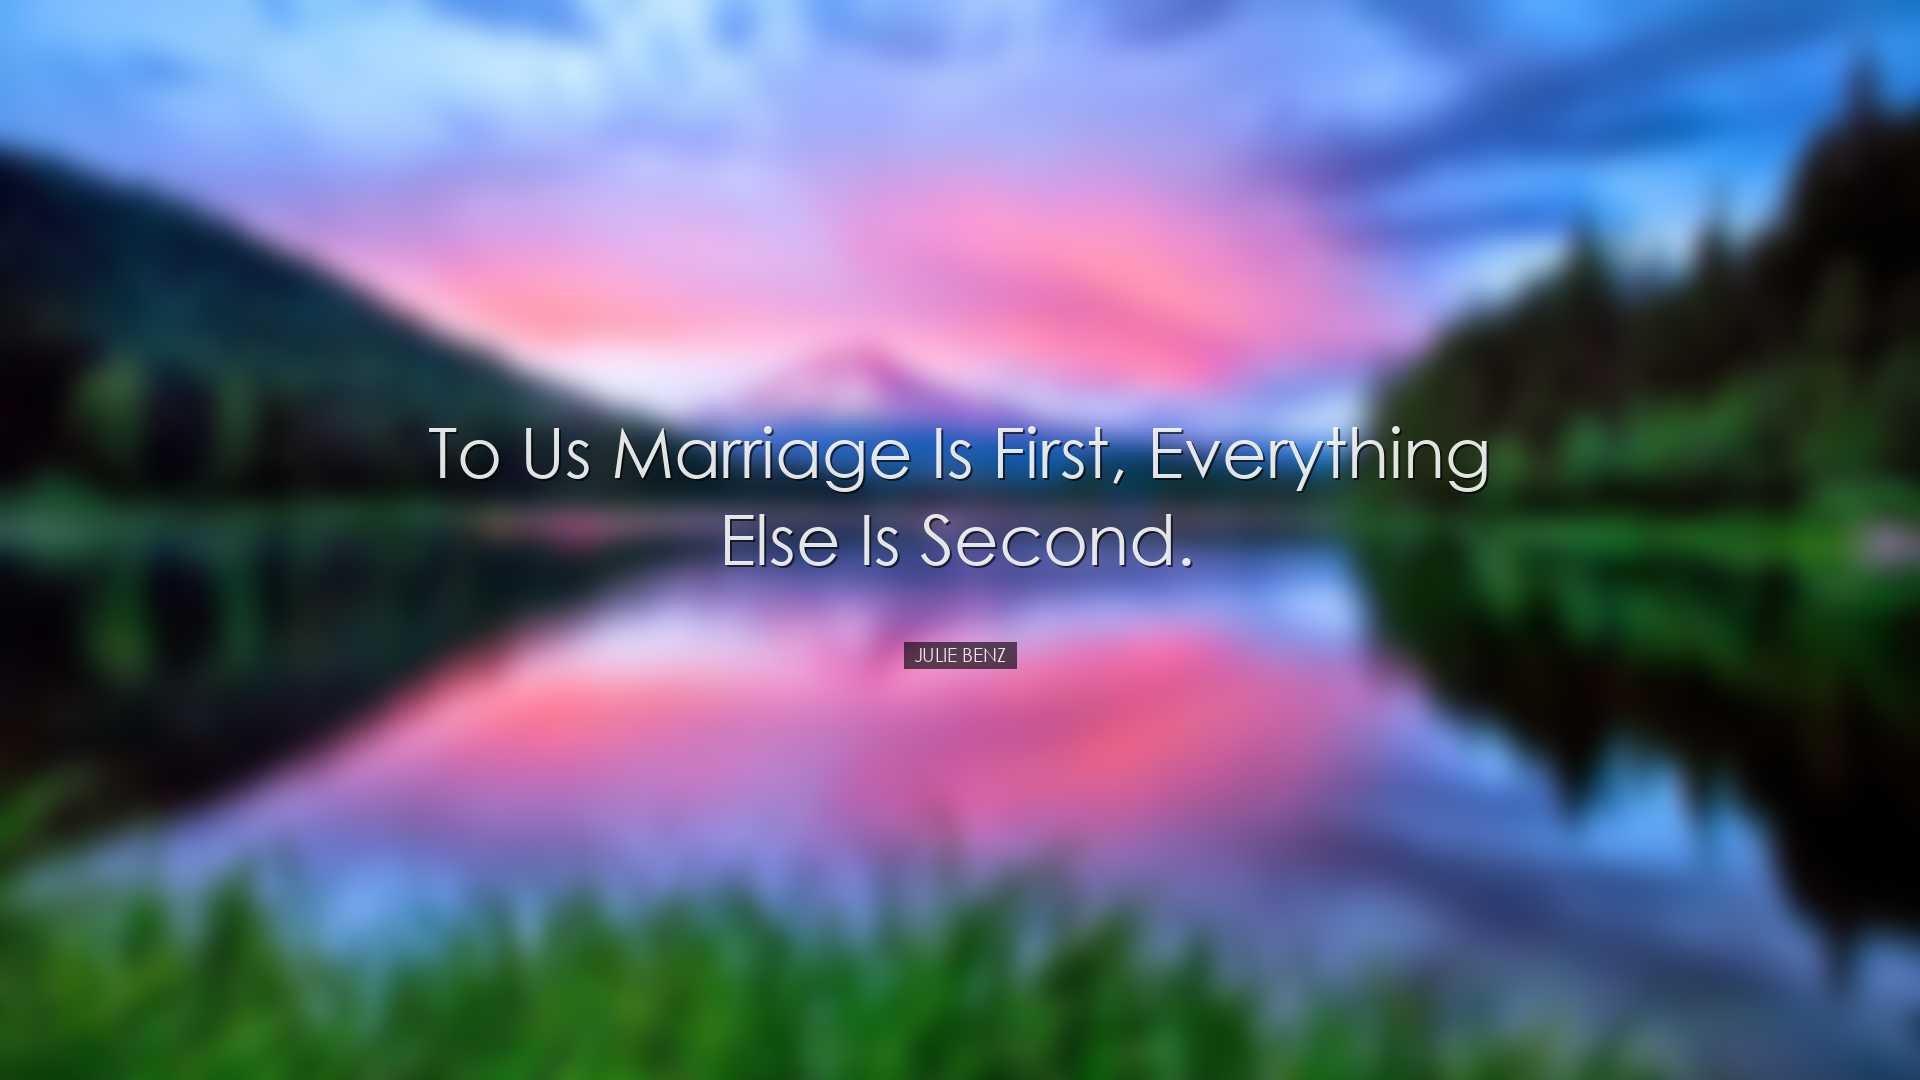 To us marriage is first, everything else is second. - Julie Benz